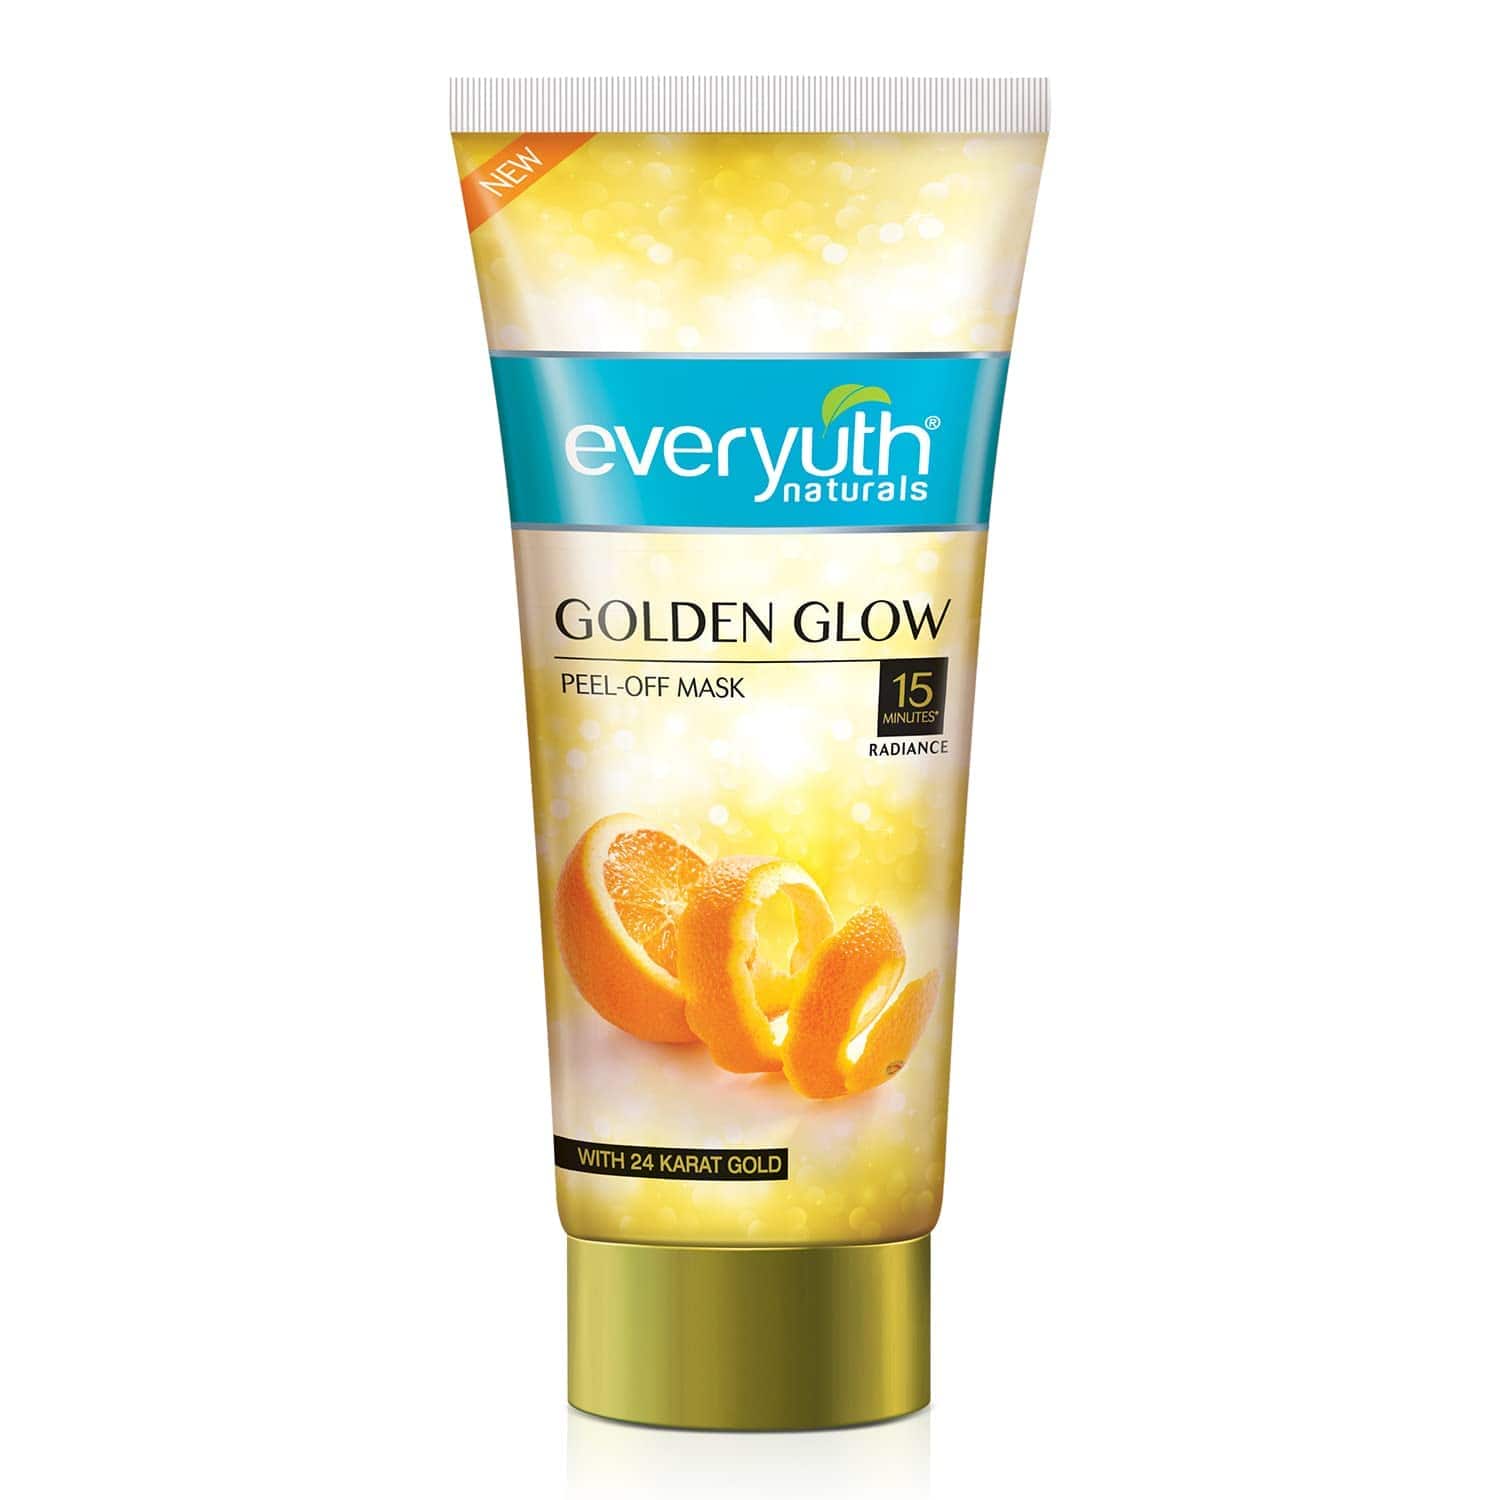 Everyuth Natural Advanced Golden Glow Peel-Off Mask